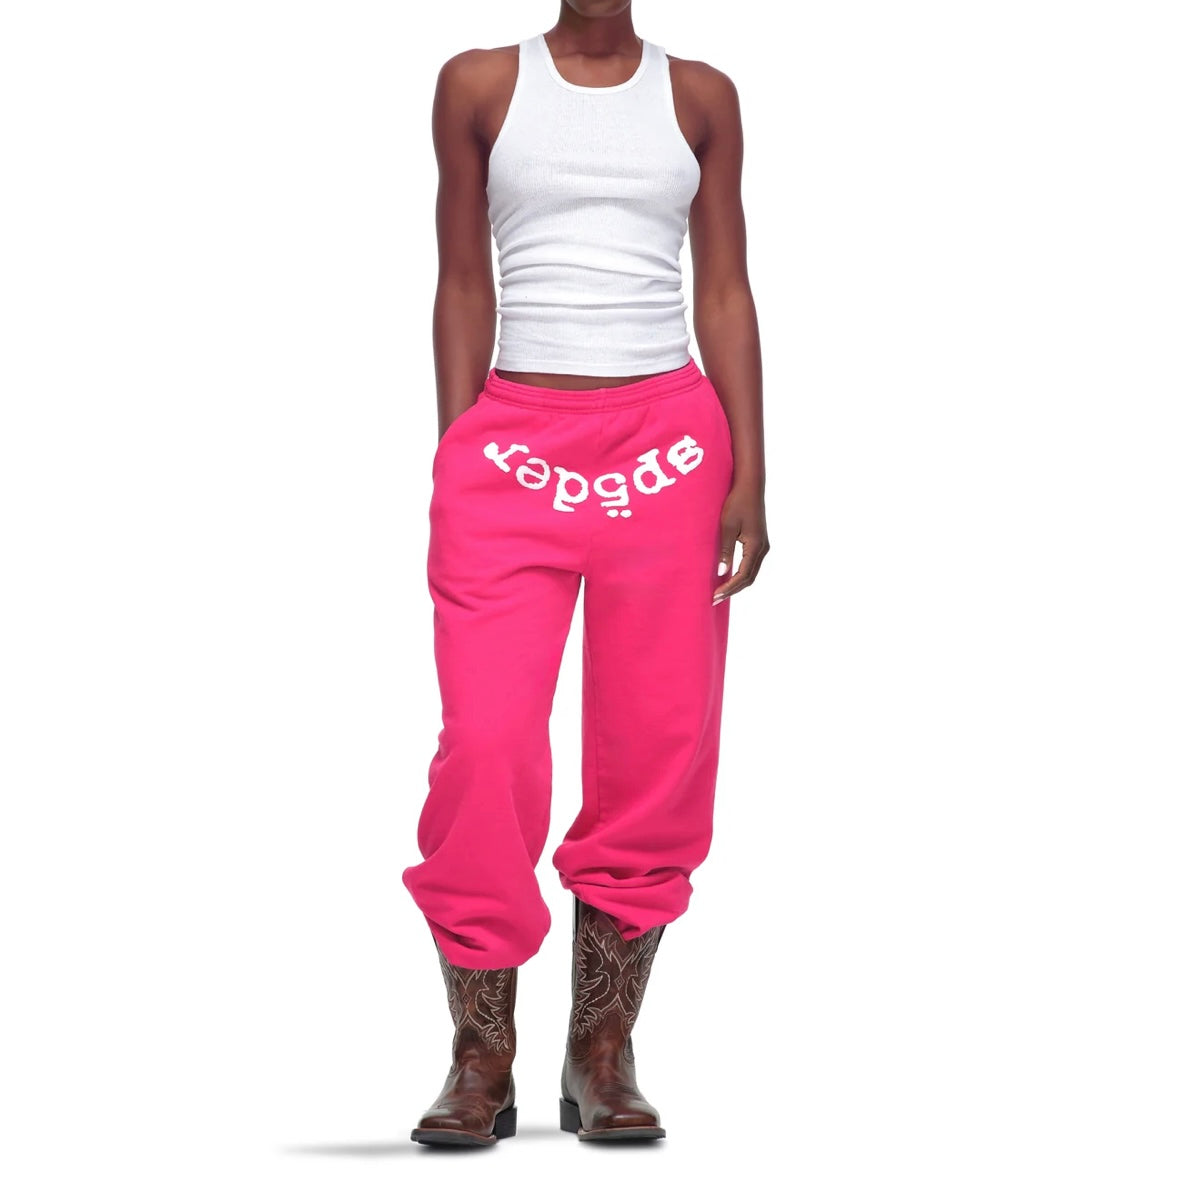 Sp5der Pink White Legacy Sweatpants On Body Front